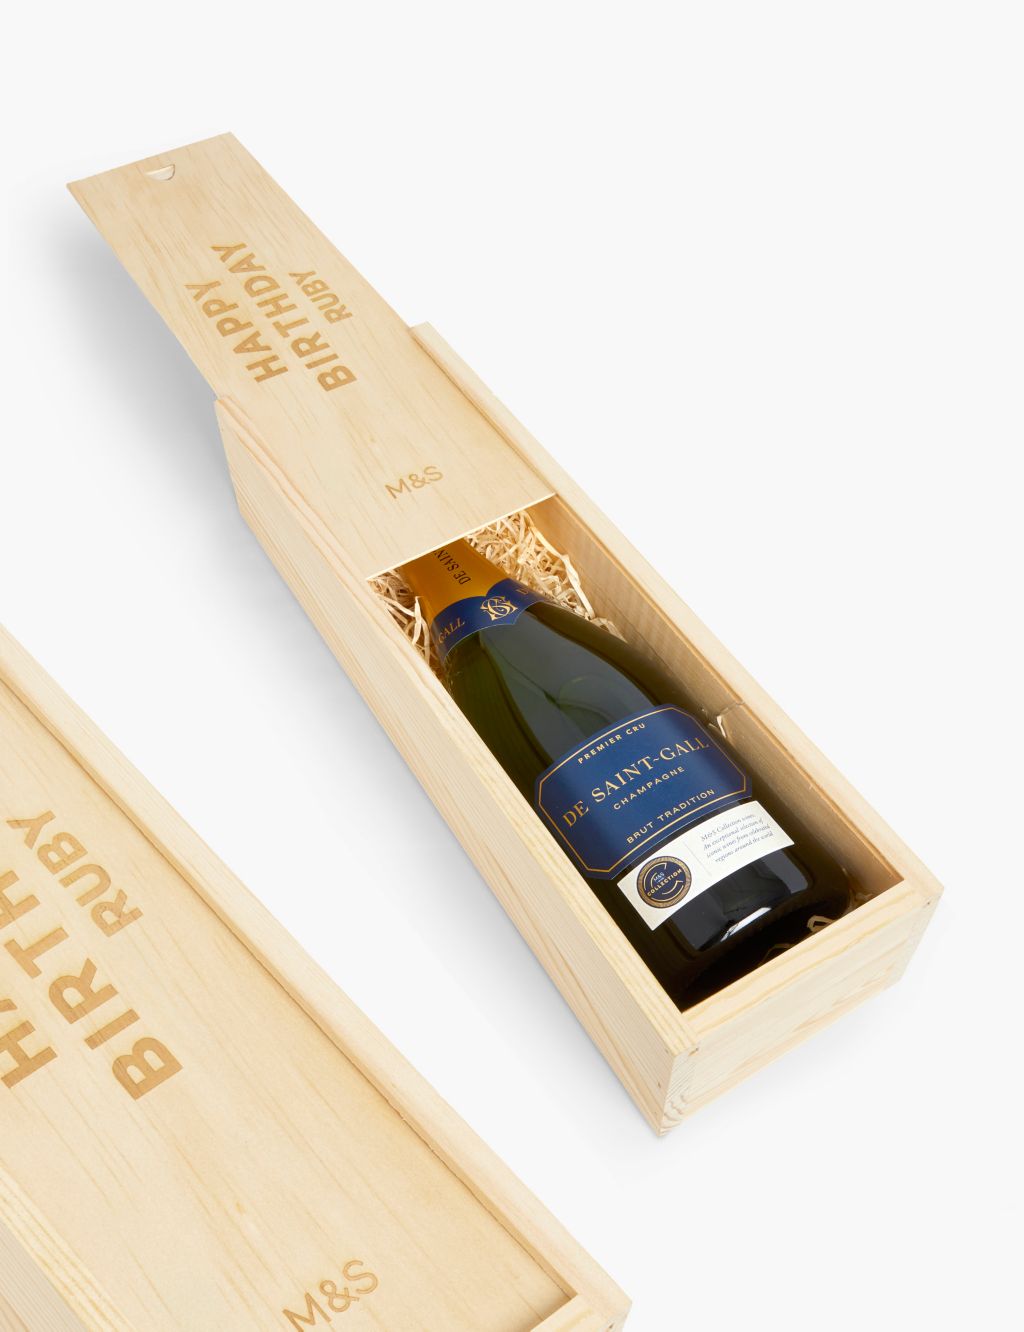 Personalised Collection St Gall Champagne Gift